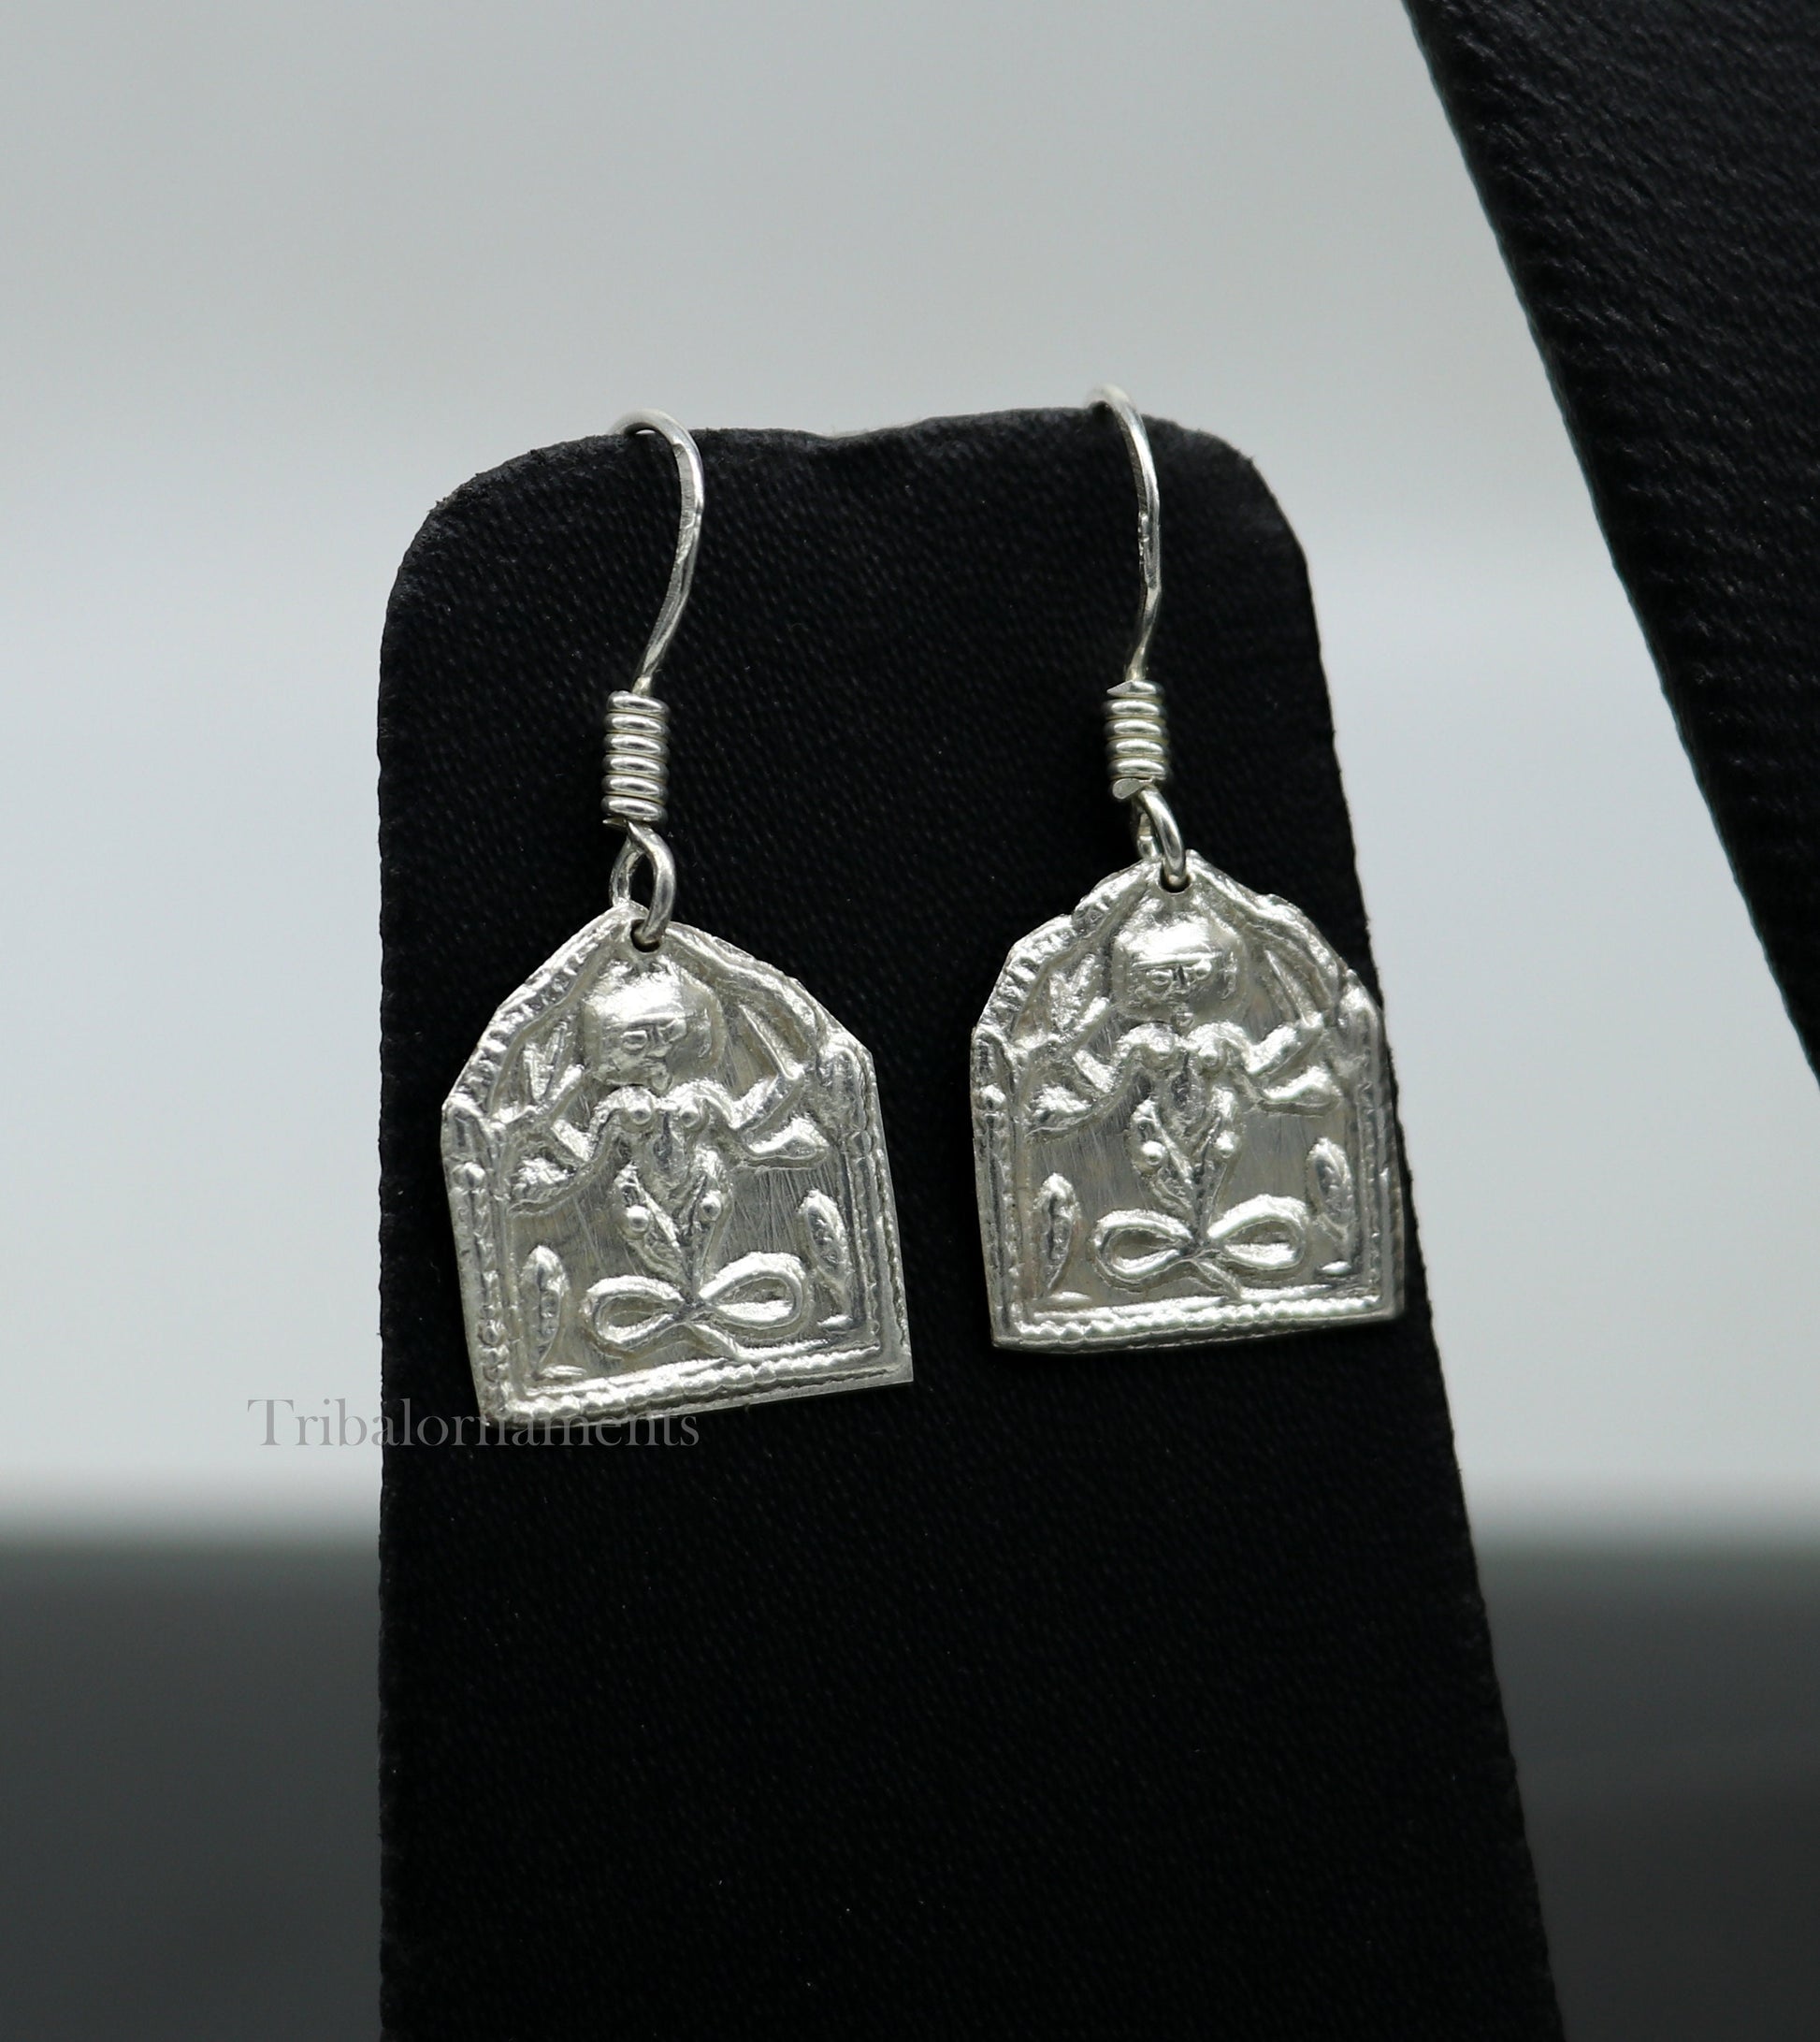 Light weight 925 sterling silver excellent customized traditional indian style hoops earring, amazing tribal ethnic earring ear956 - TRIBAL ORNAMENTS